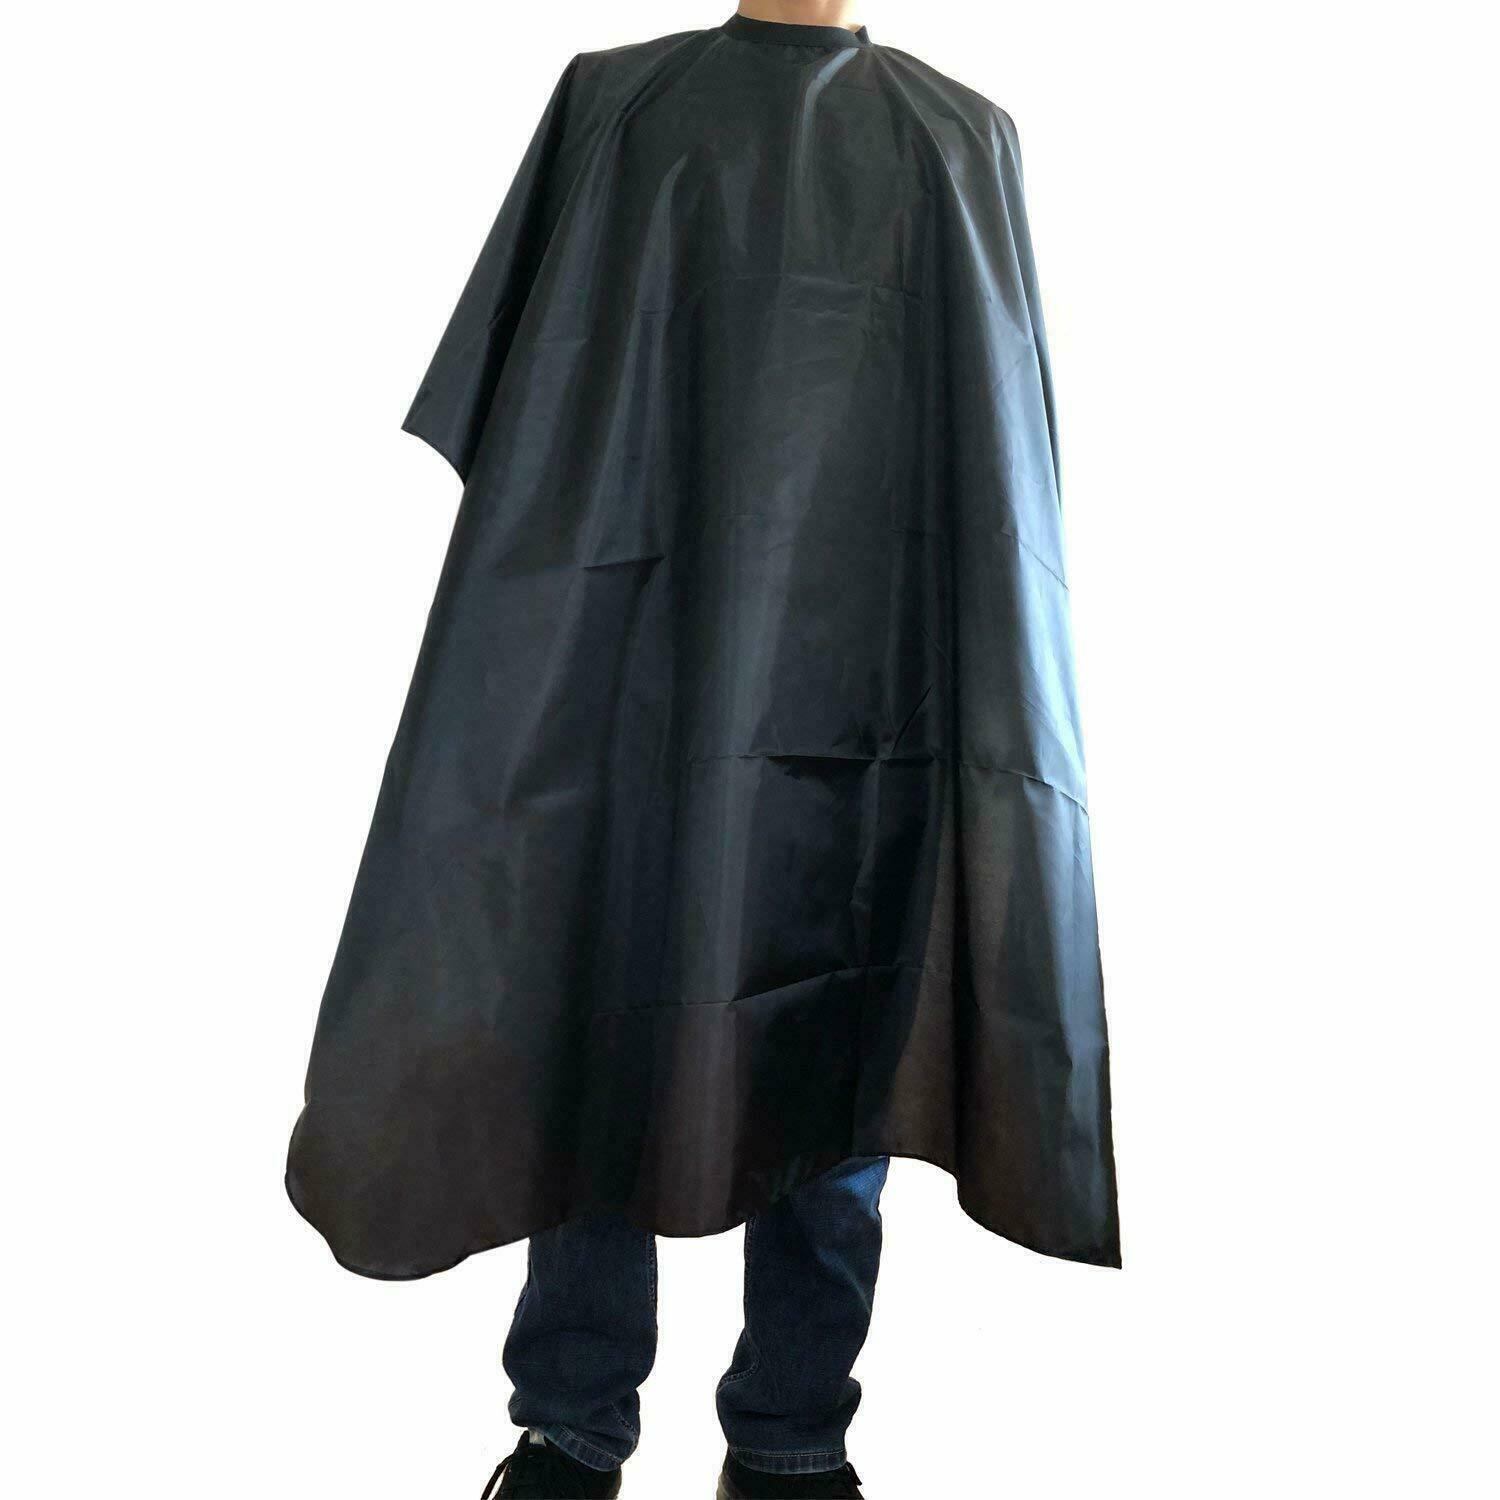 Black Haircutting Barber Gown Professional Hair Cut Cutting Salon Barber Hairdressing Unisex Gown Cape Apron